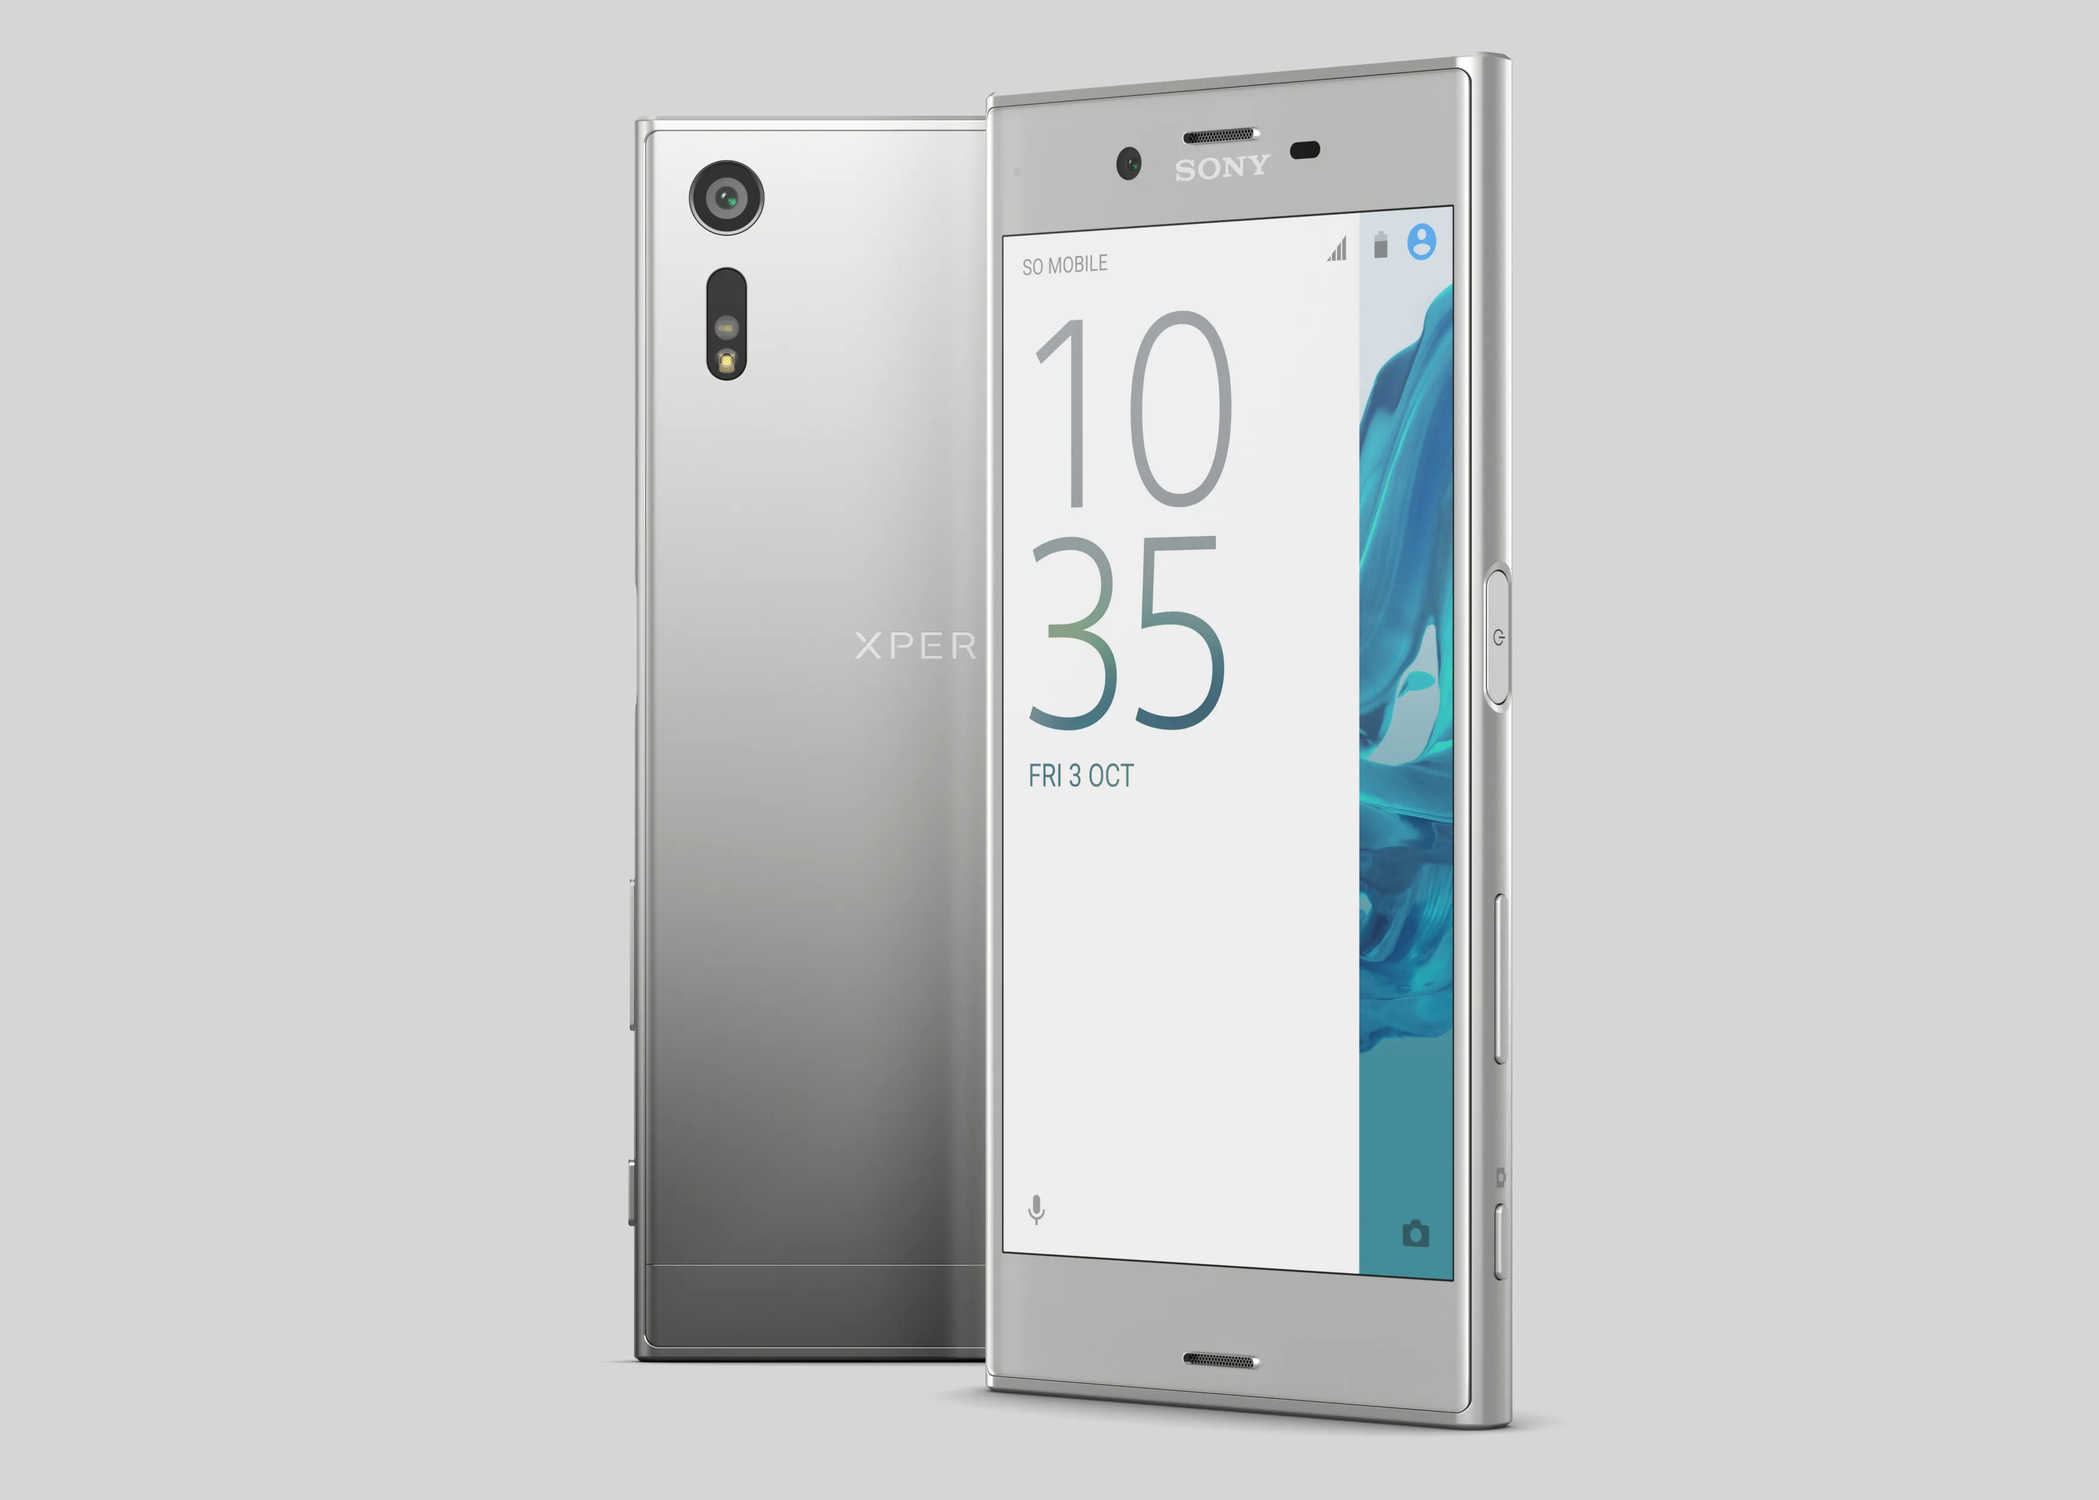 Comprehensive Guide To Rooting Sony Xperia Devices